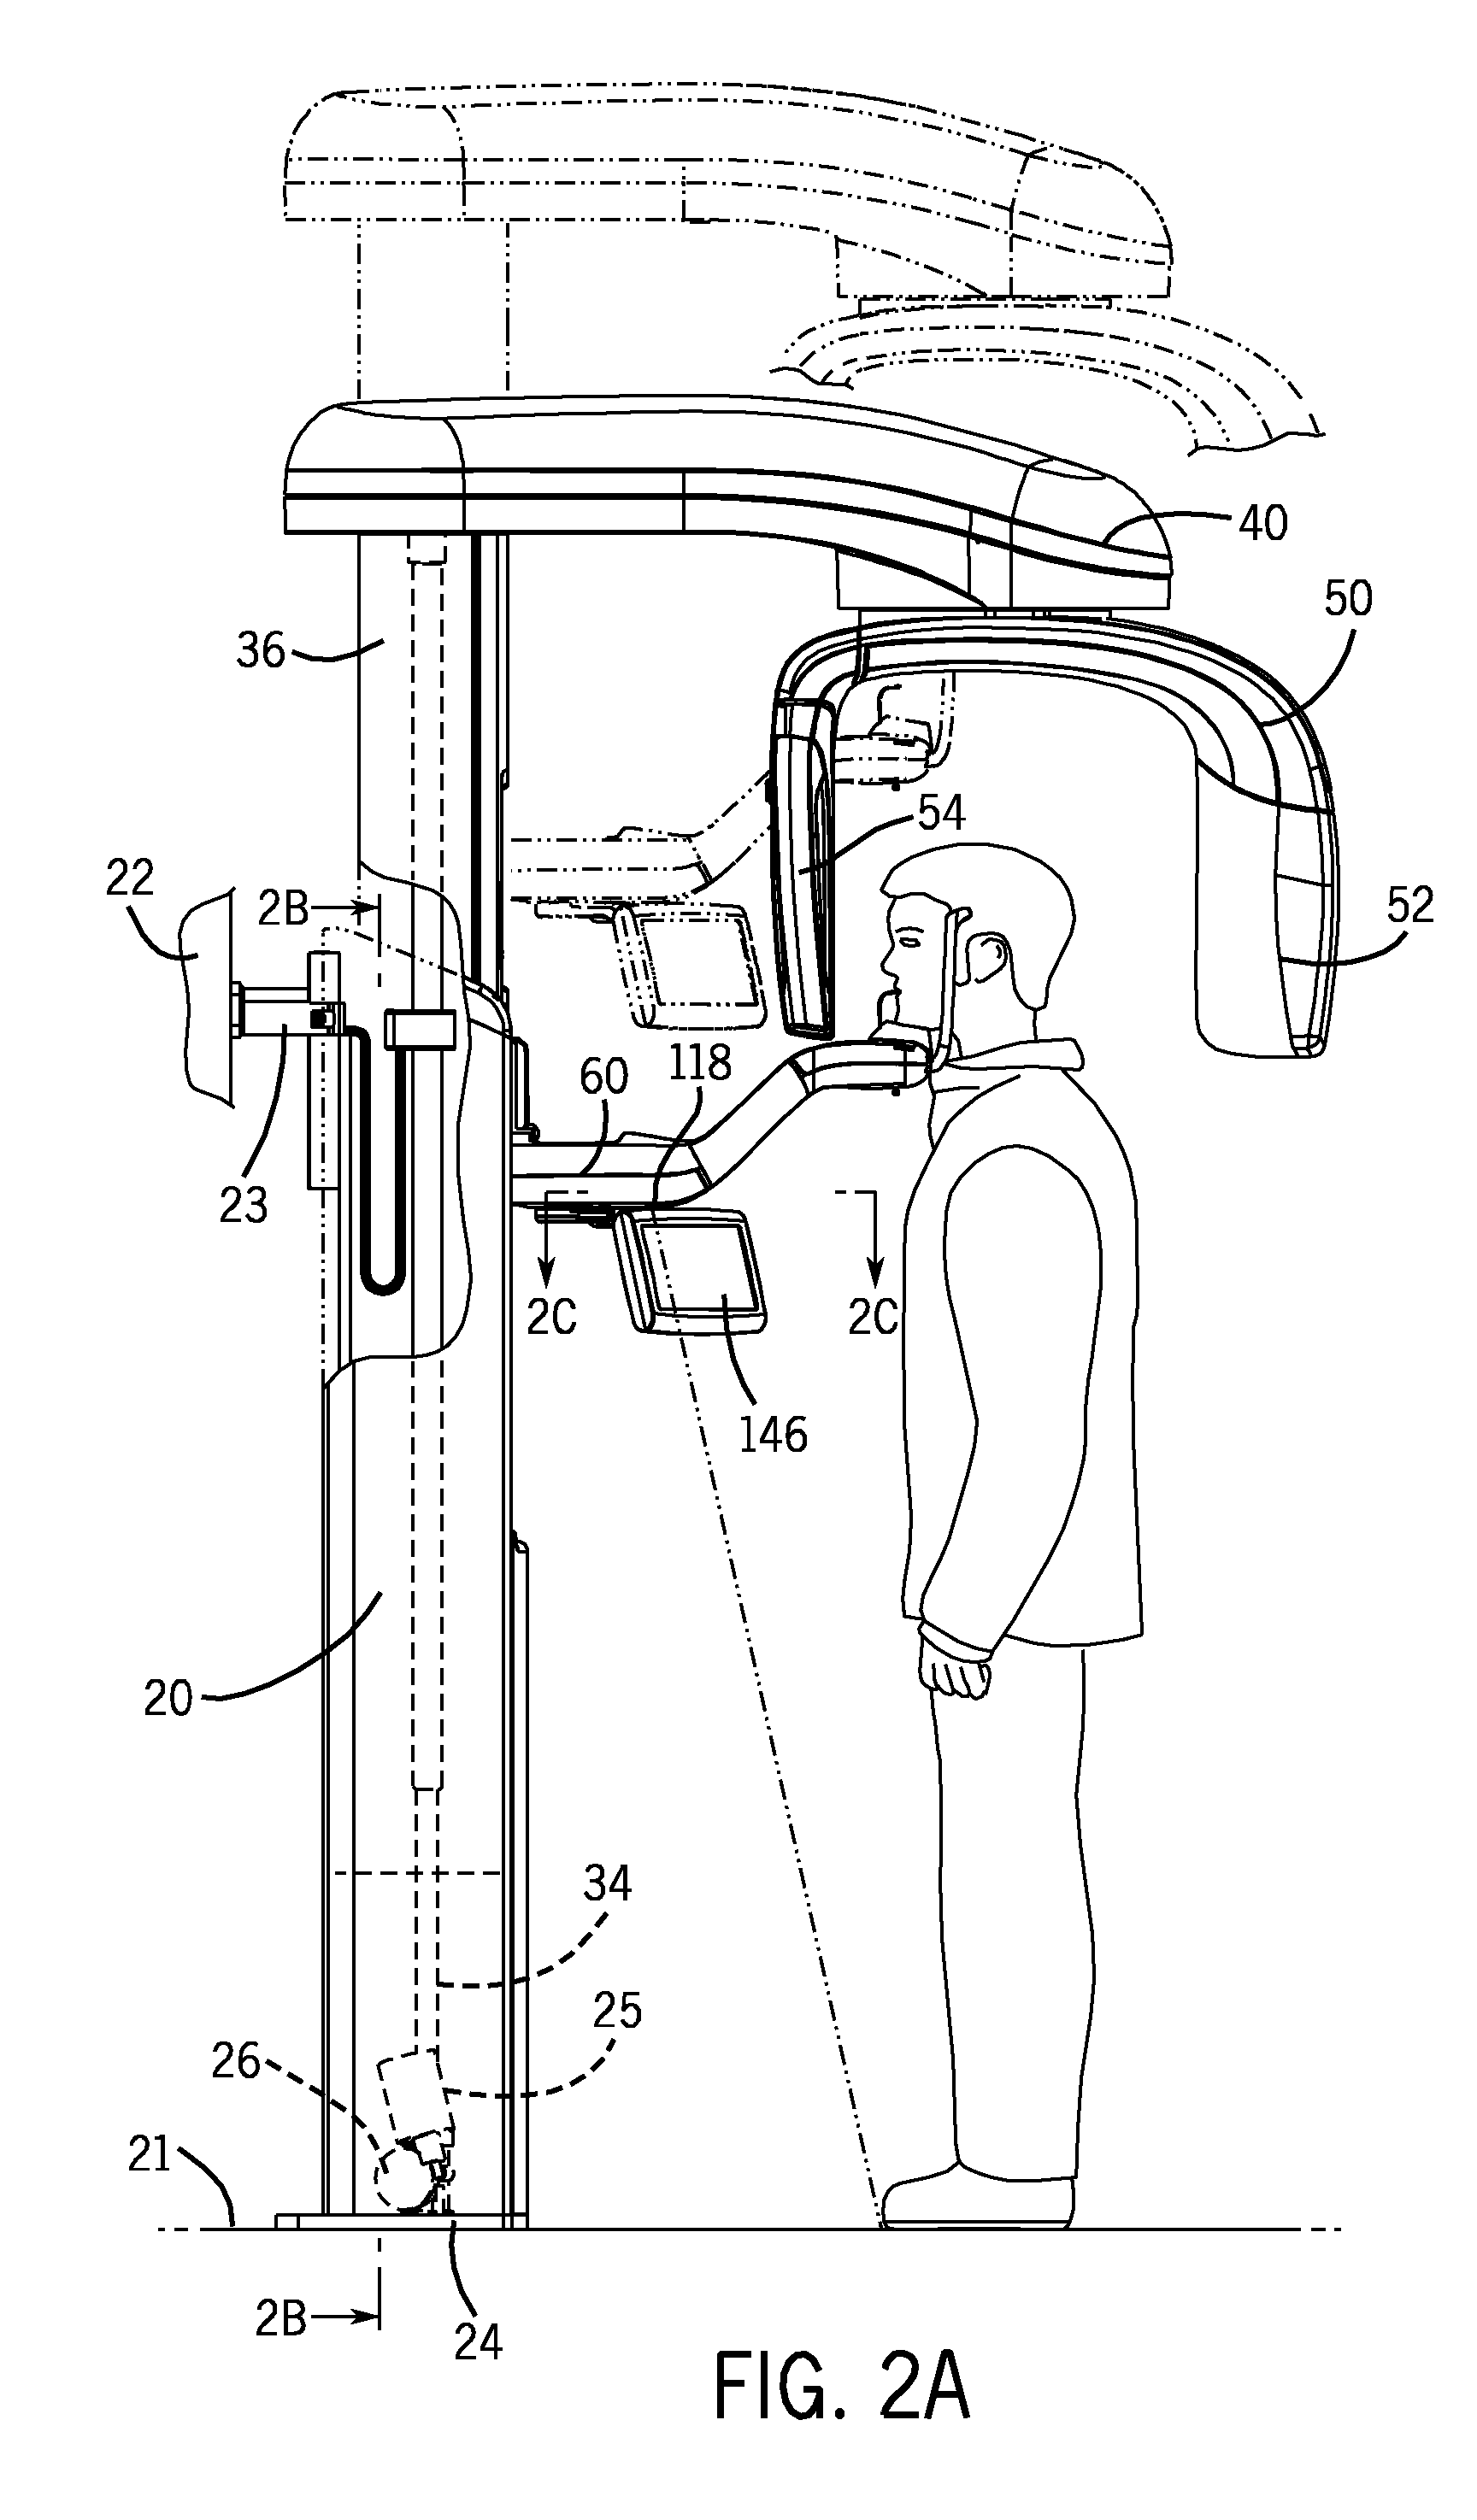 Patient positioning system for panoramic dental radiation imaging system